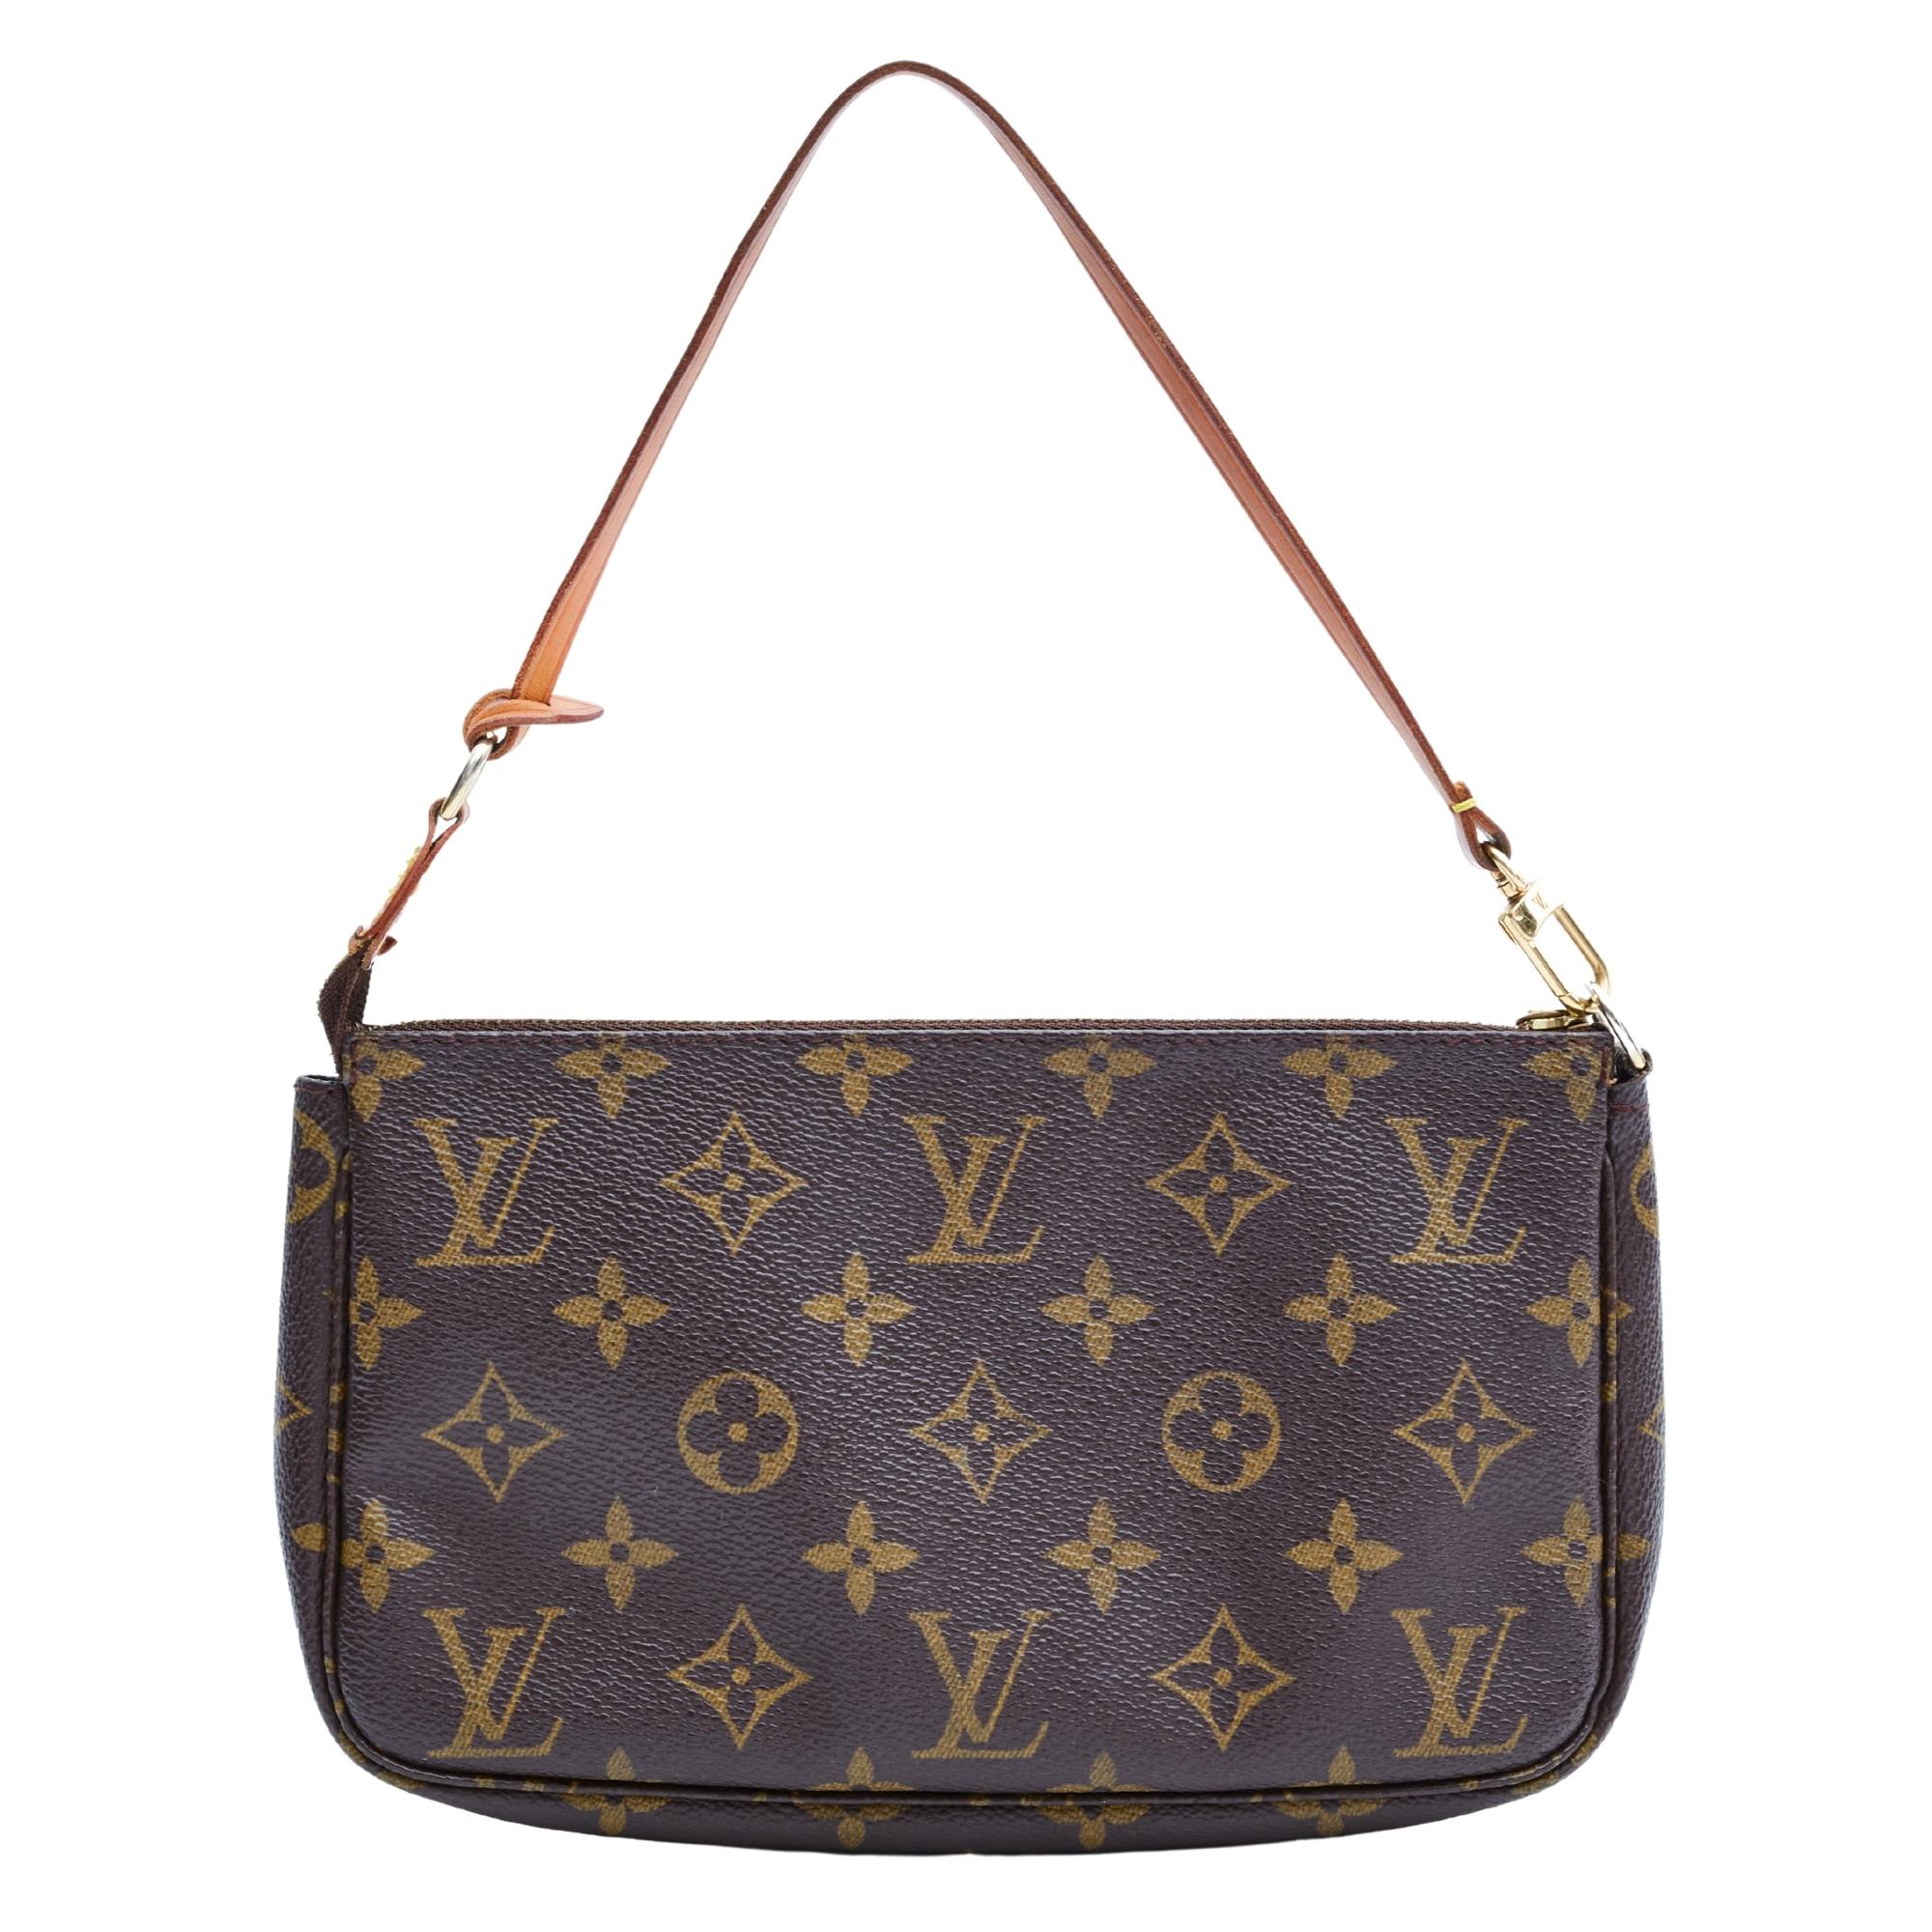 This bag is made with brown canvas with Louis Vuitton's monogram print with leather details. Featuring a leather strap with lobster clamp attachment, top zip closure and brown woven fabric interior lining.

COLOR: Brown
MATERIAL: Coated canvas
DATE